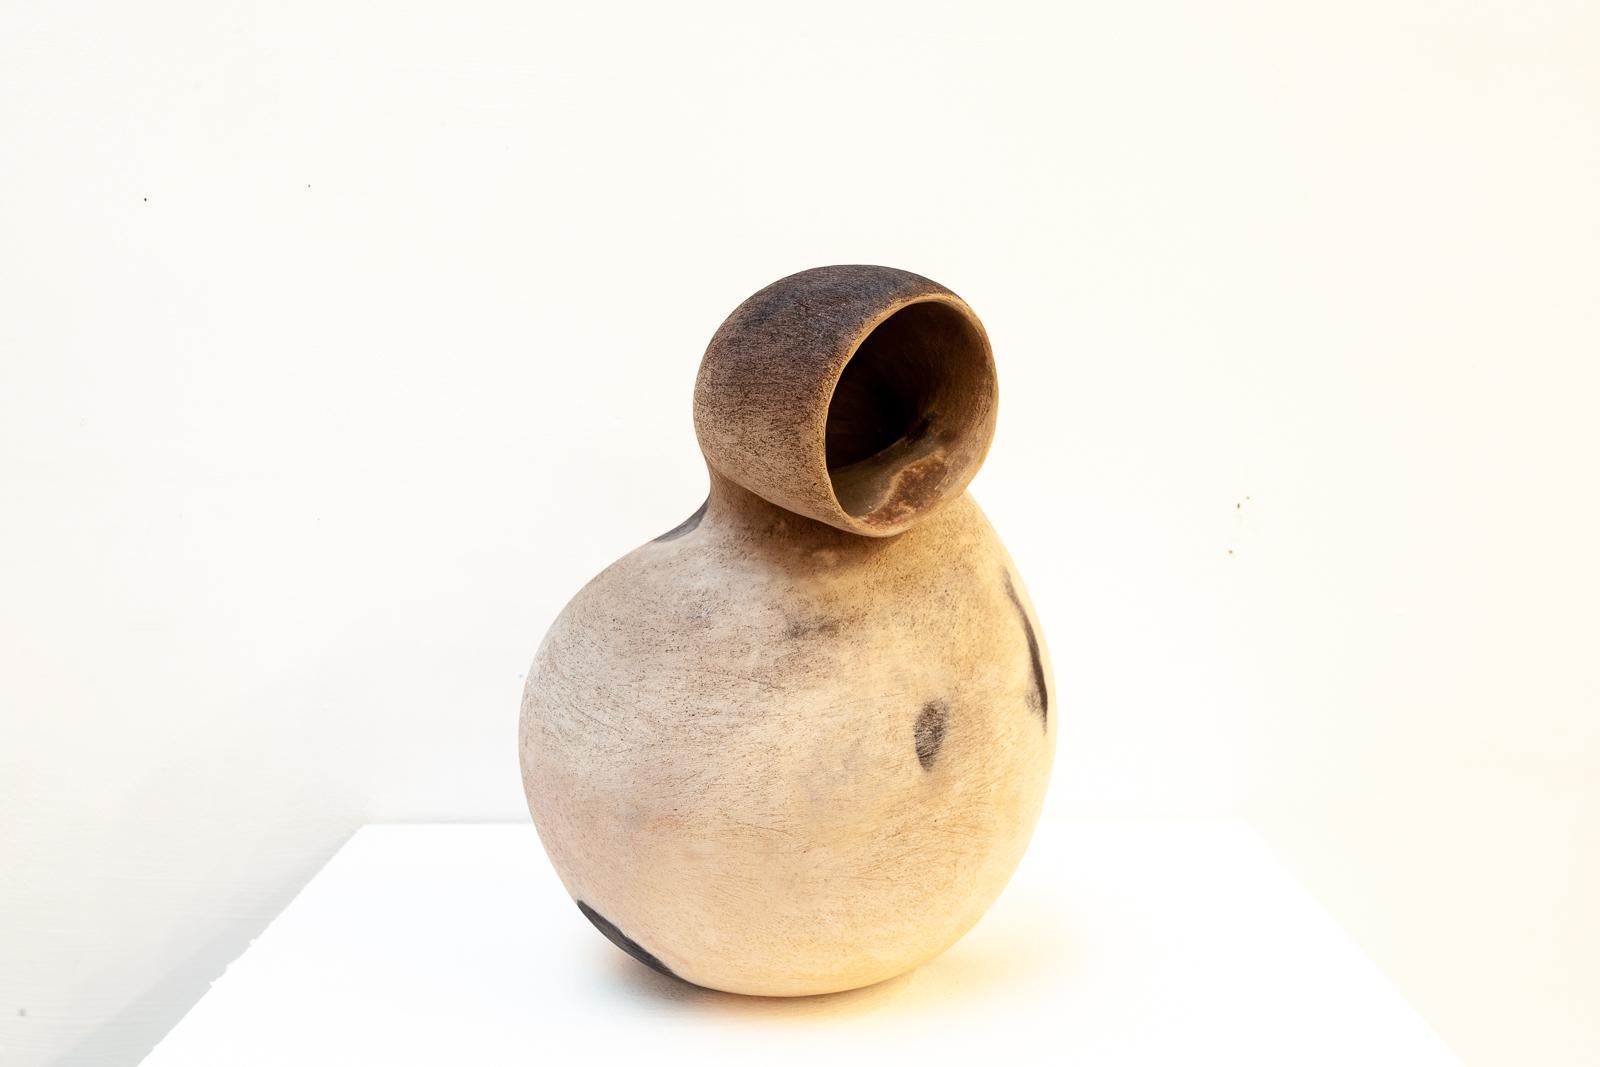 Handbuilt, Sawdust fired Ceramic. From her earliest experiments in art Alison has found the variety and beauty of the human form endlessly fascinating and life-drawing was her first love. For her the human element is vital. 

It was whilst training